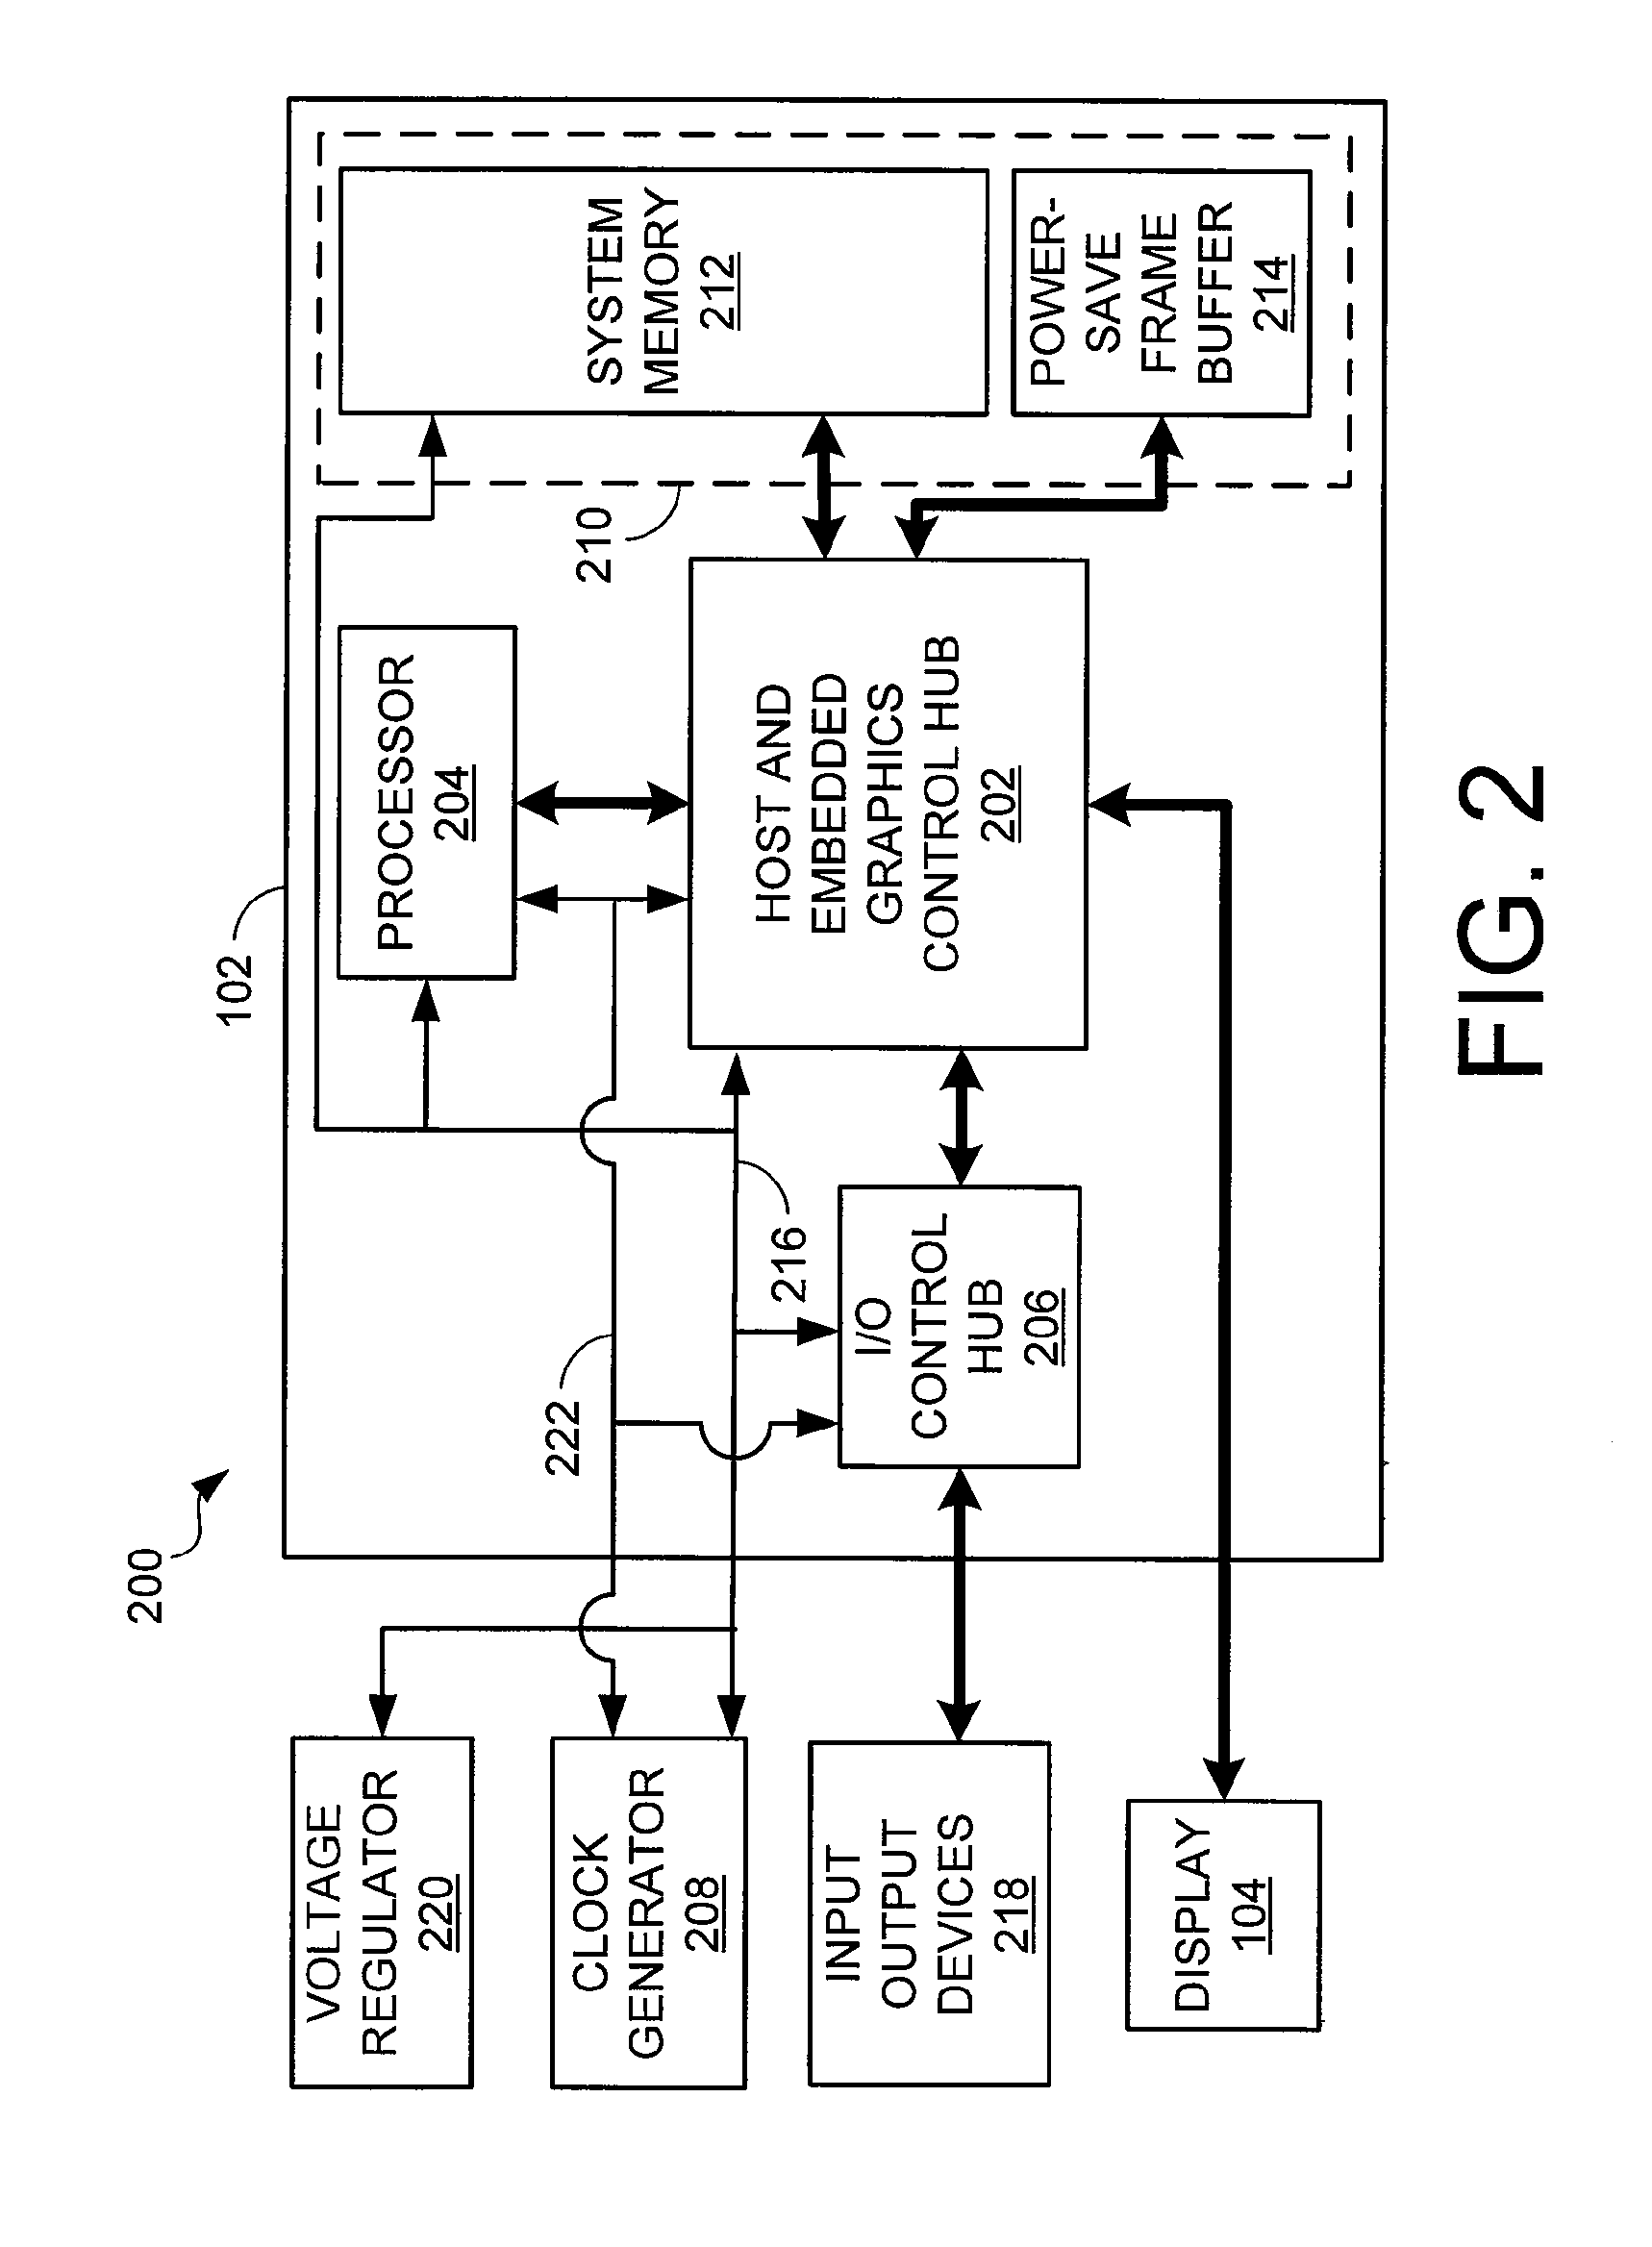 Systems and Methods for Low-Power Computer Operation